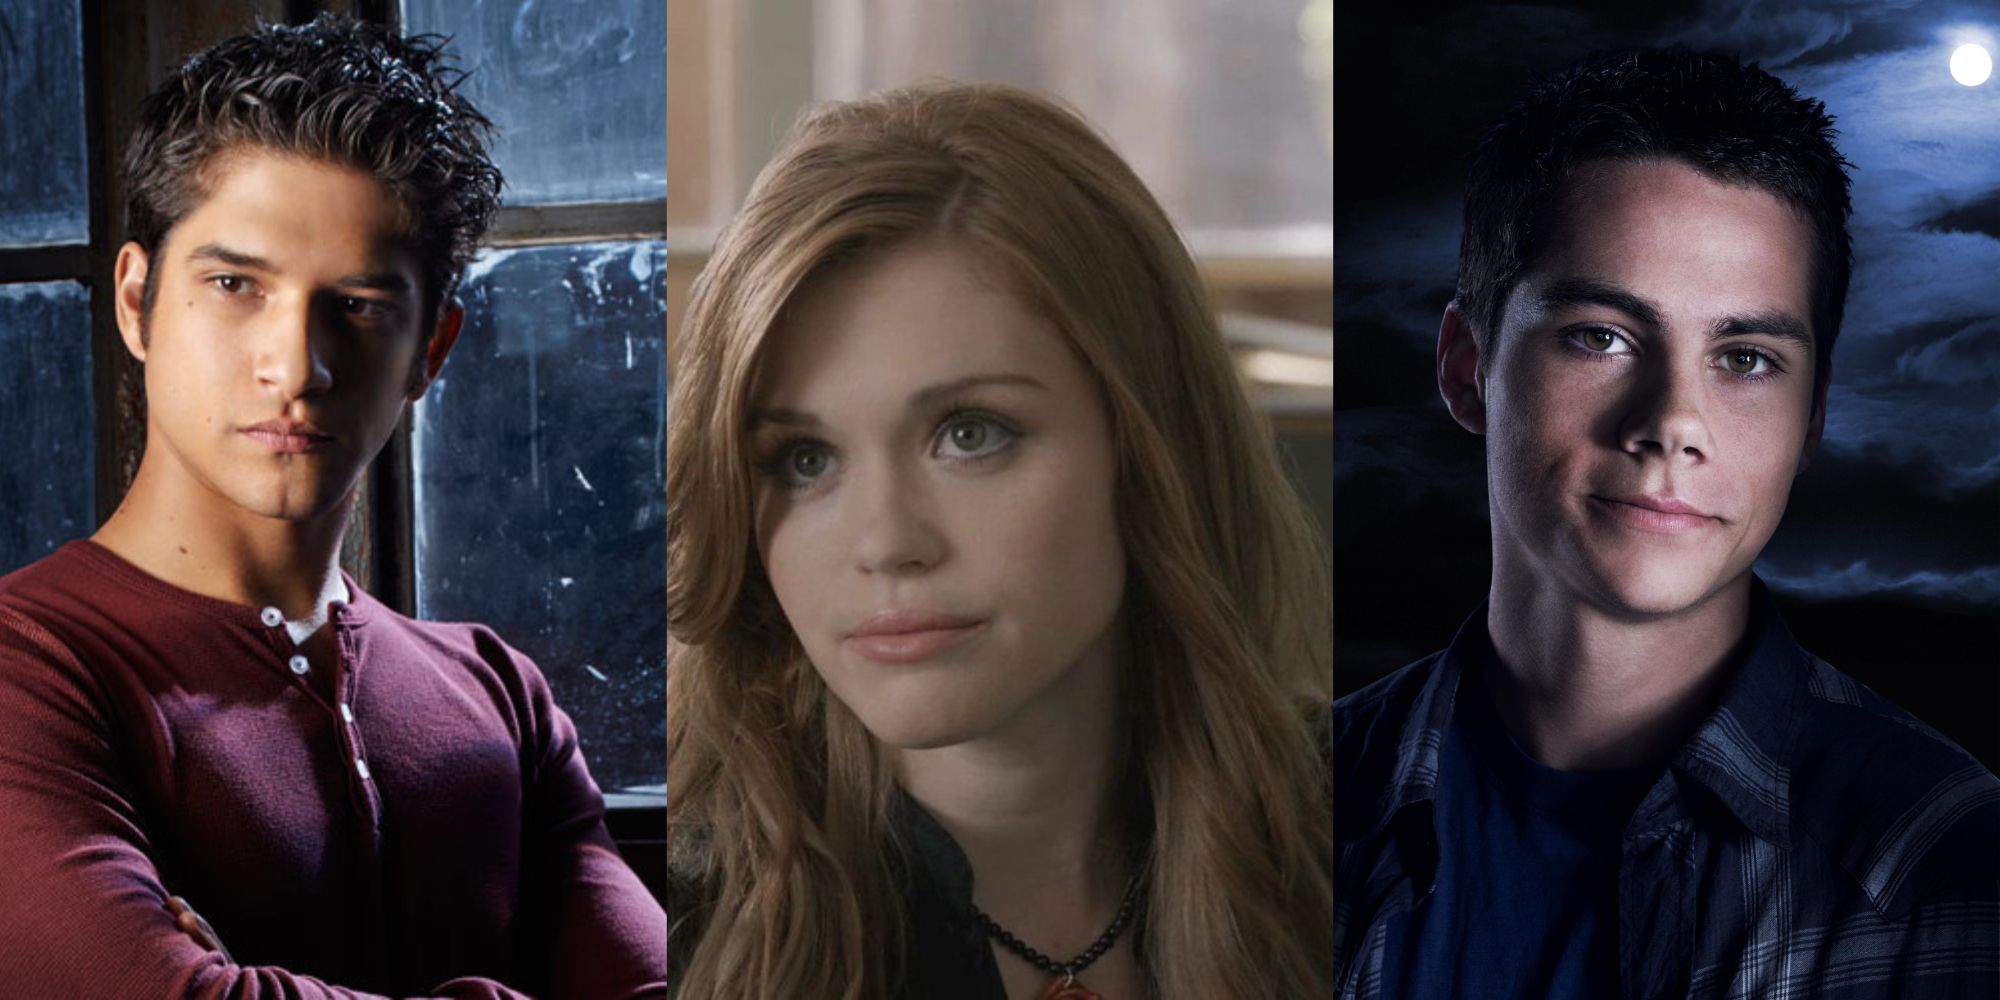 Teen Wolf: Every Season 1 Character Who Has Lived To The End (So Far)